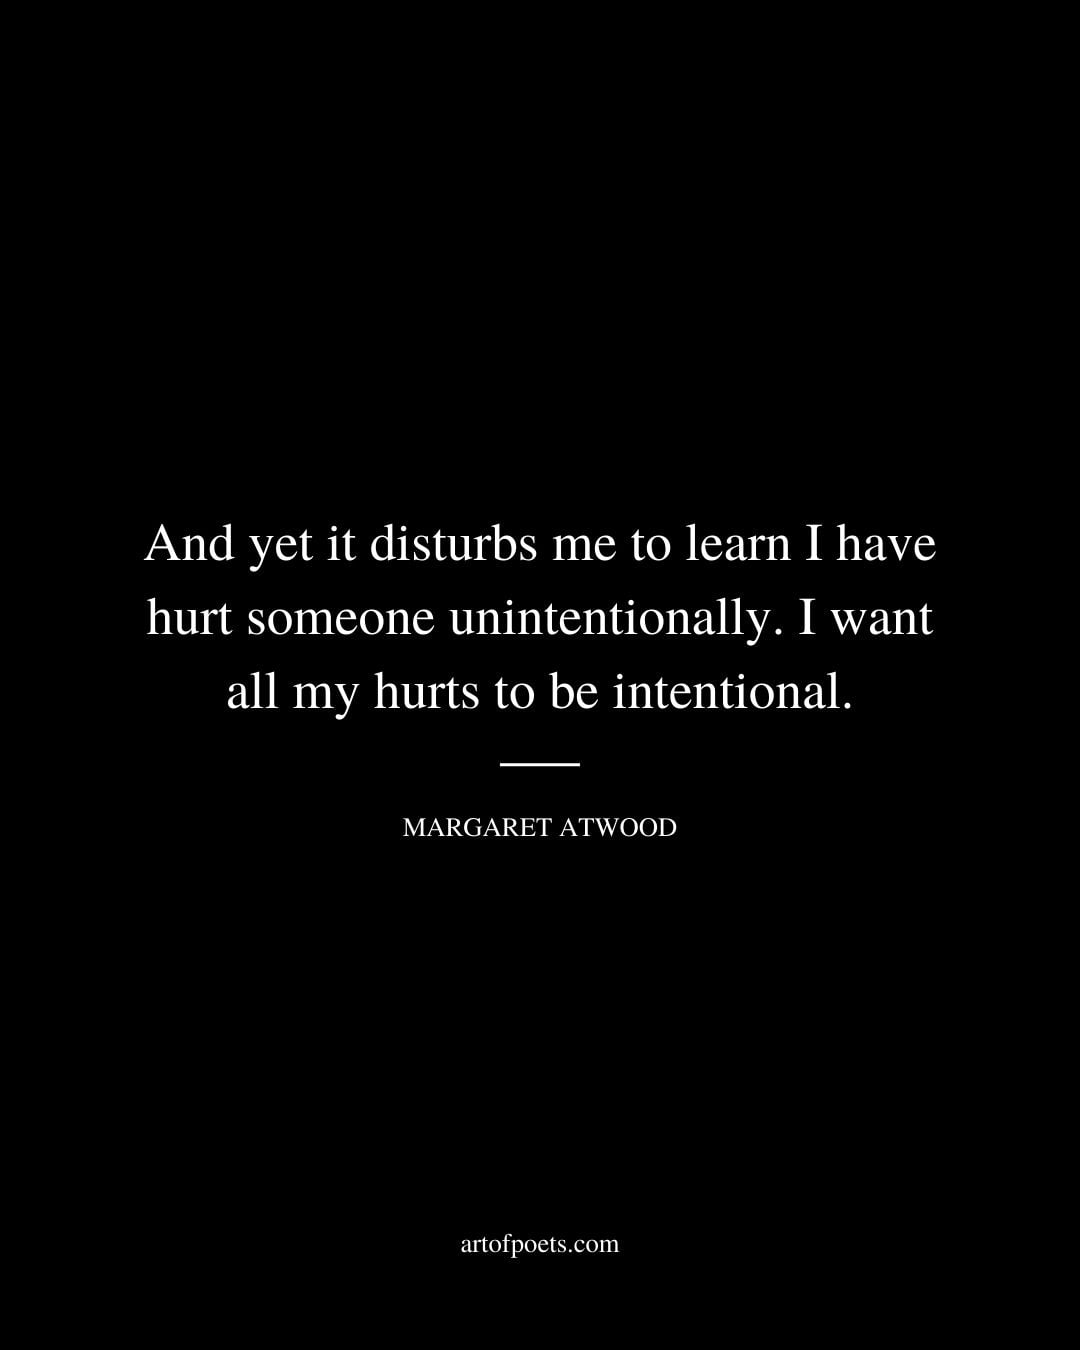 And yet it disturbs me to learn I have hurt someone unintentionally. I want all my hurts to be intentional